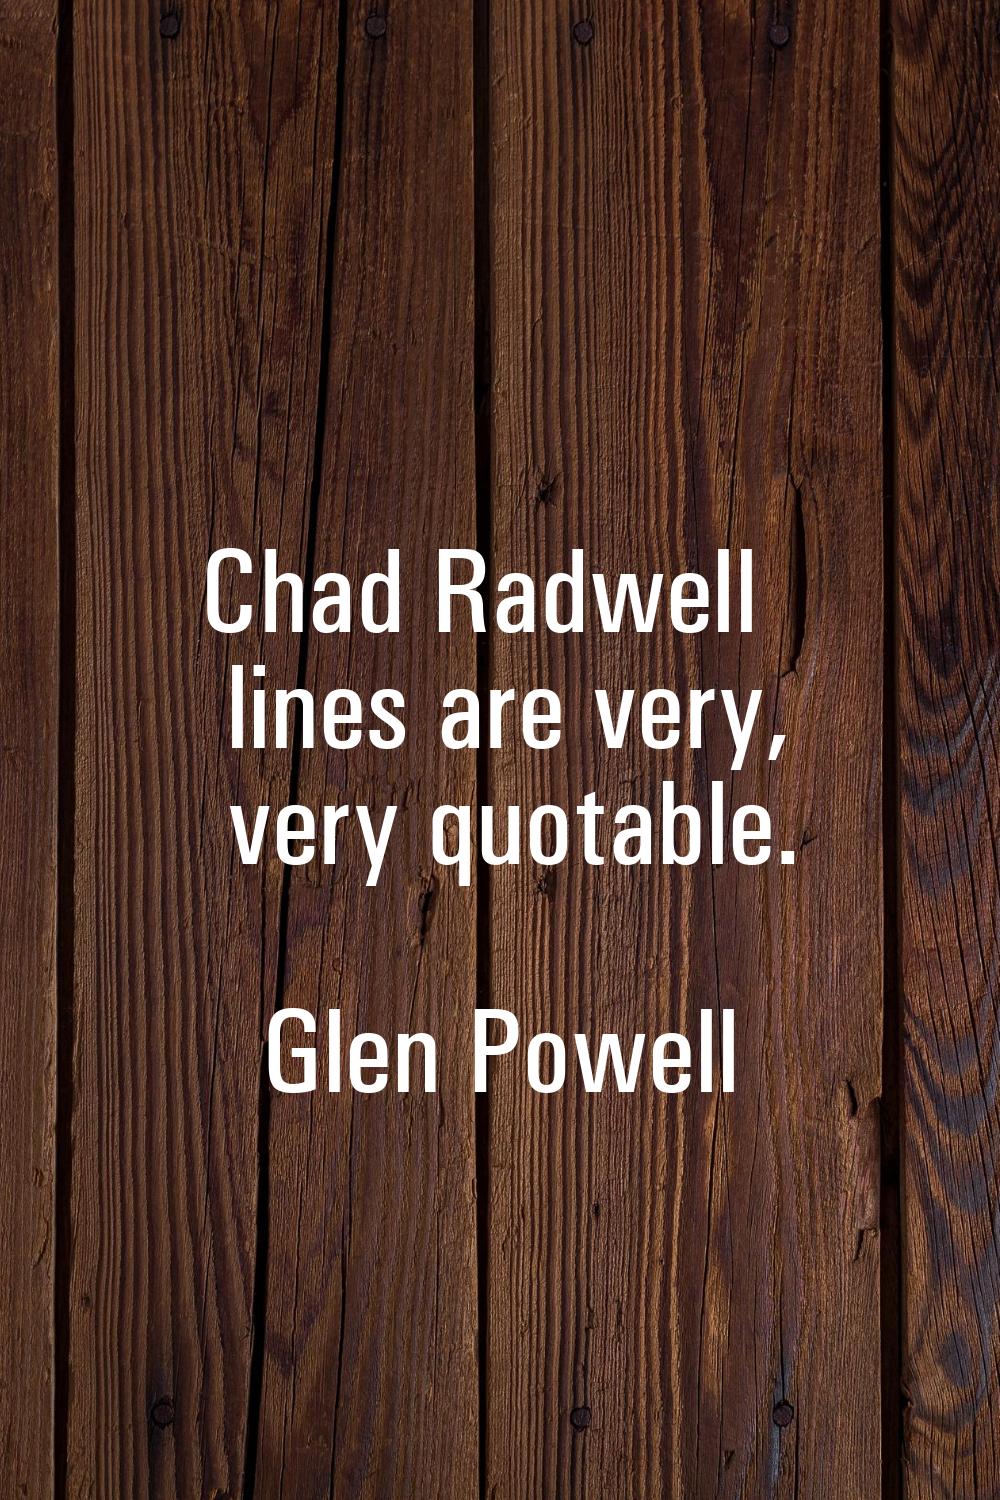 Chad Radwell lines are very, very quotable.